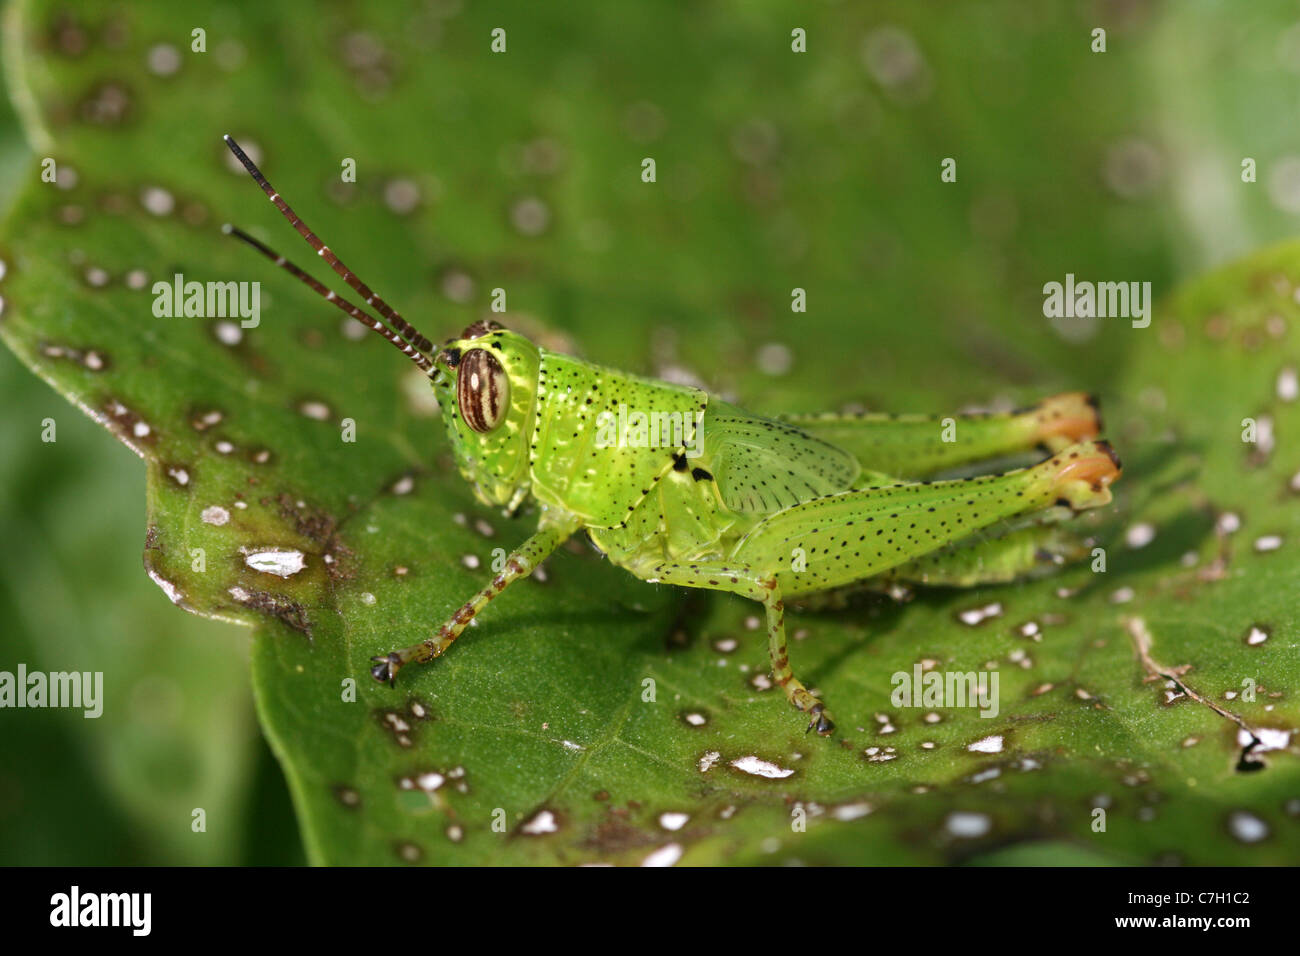 Grasshopper Nymph Sits Camouflaged On A Leaf In Java, Indonesia Stock Photo